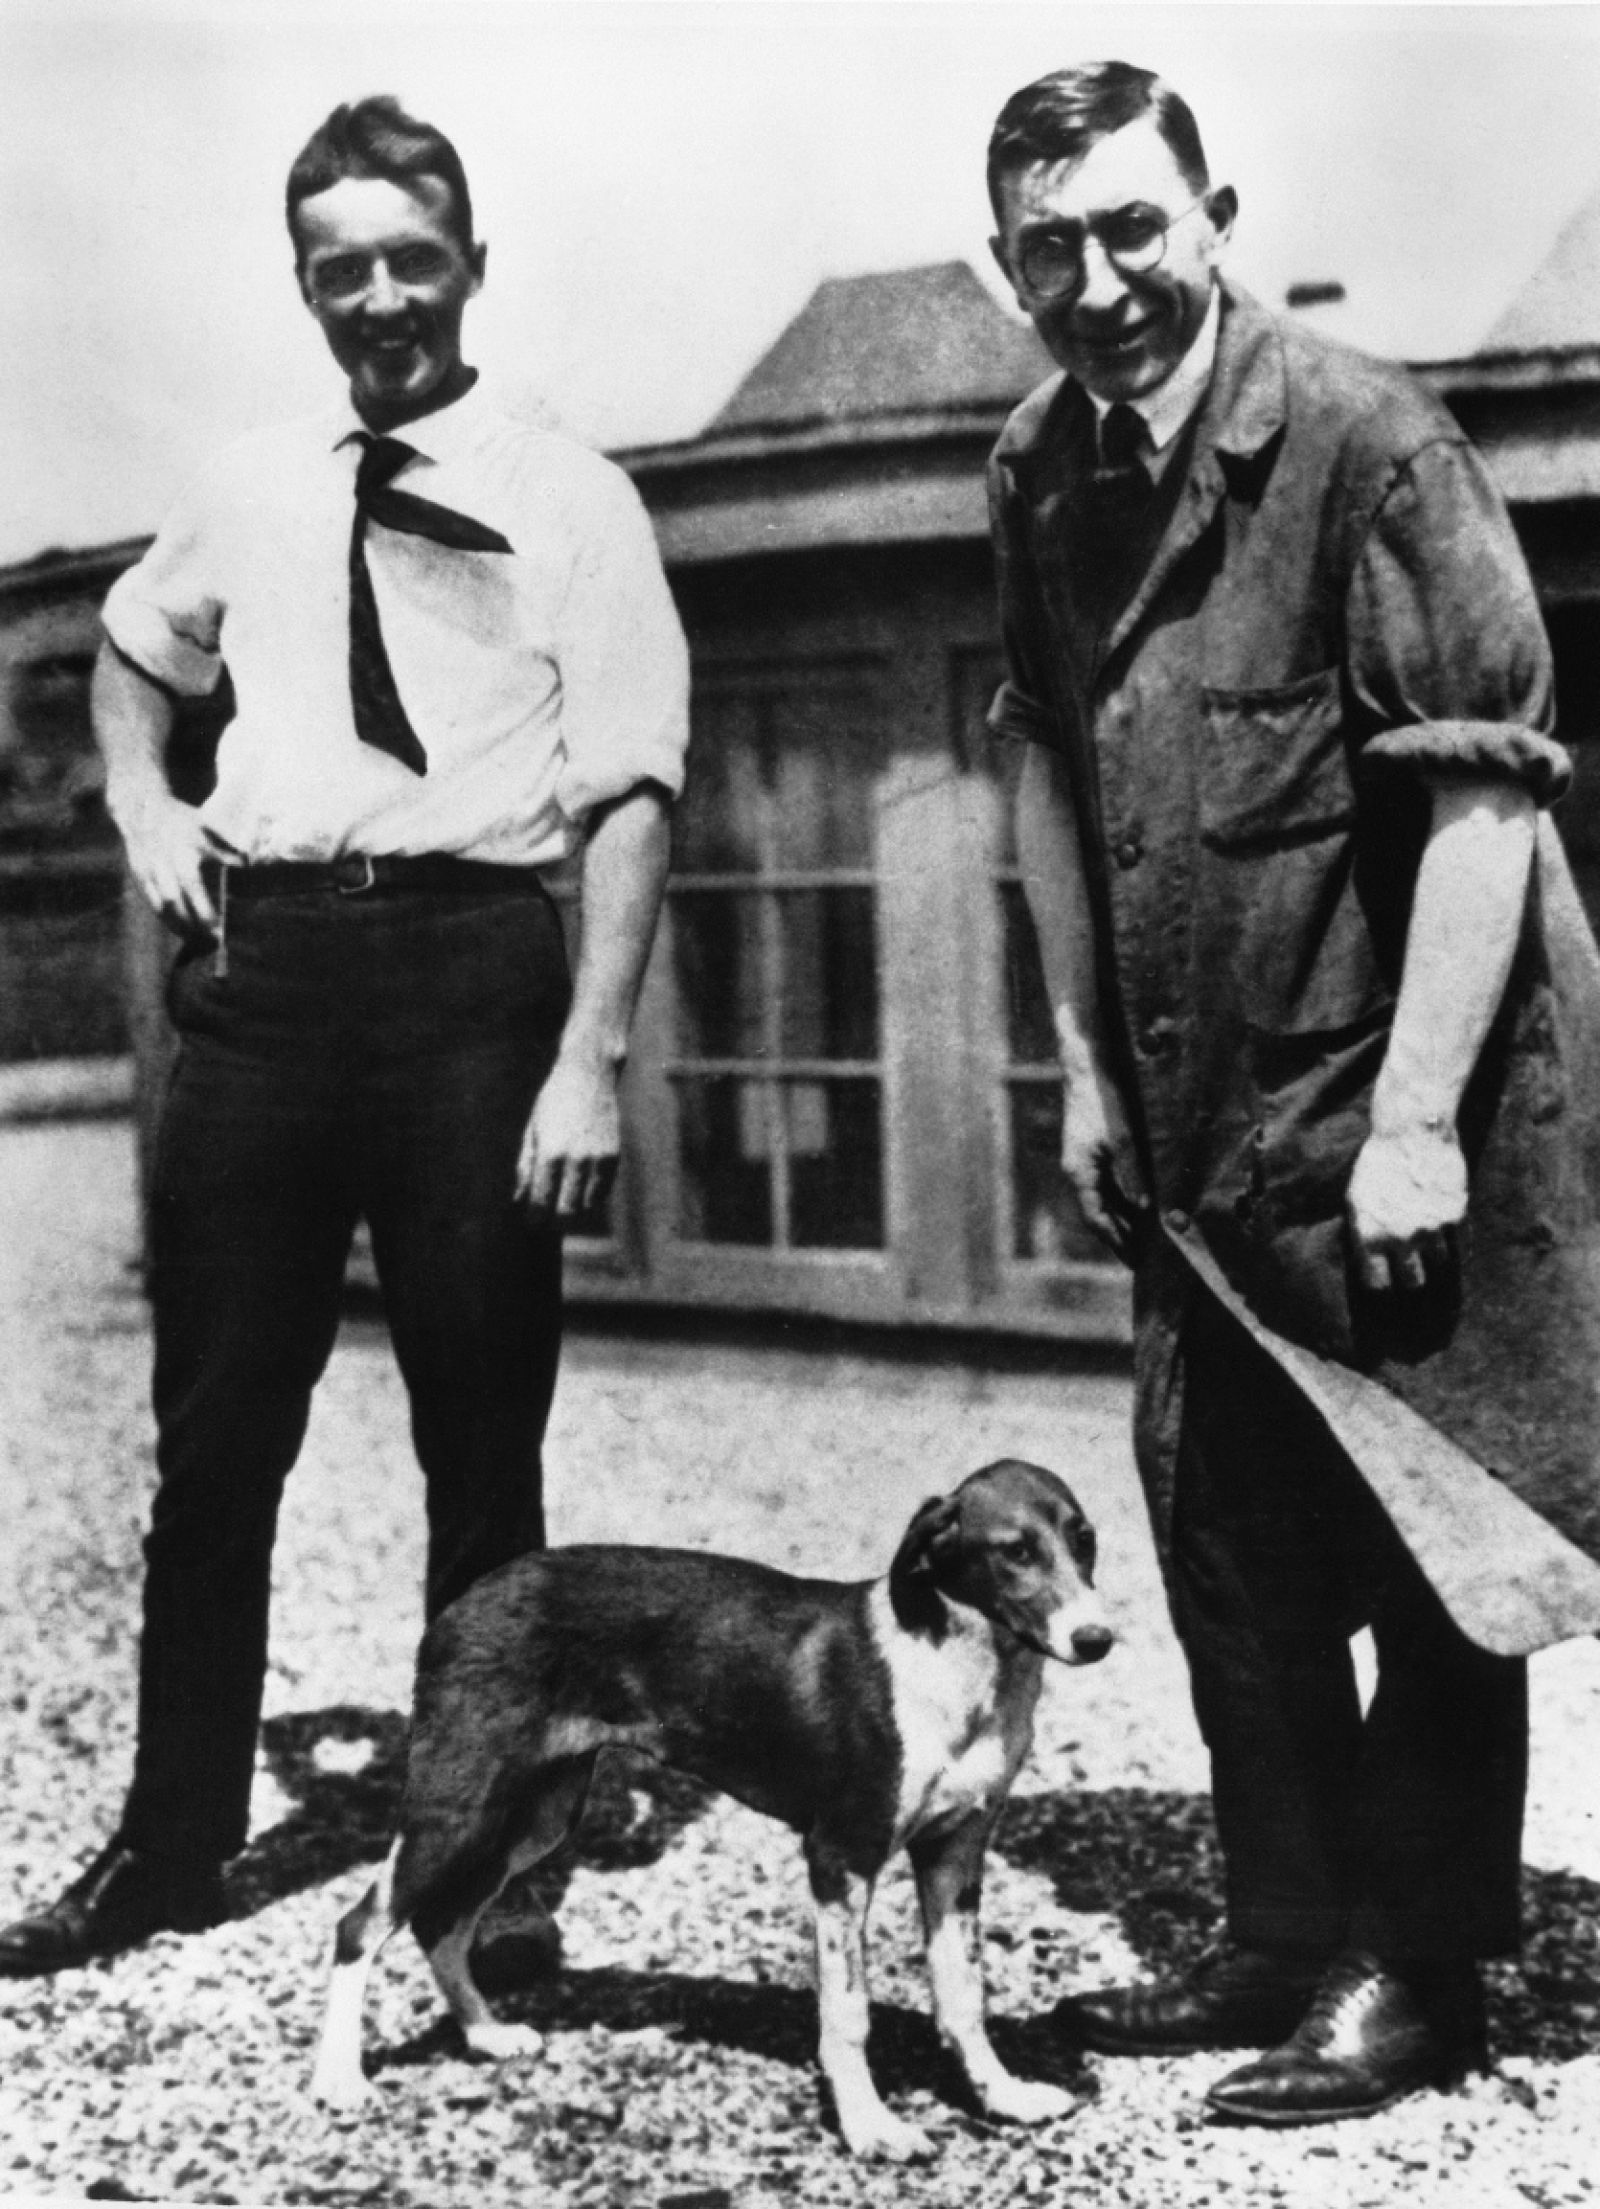 Banting and Best with first dog treated with insulin